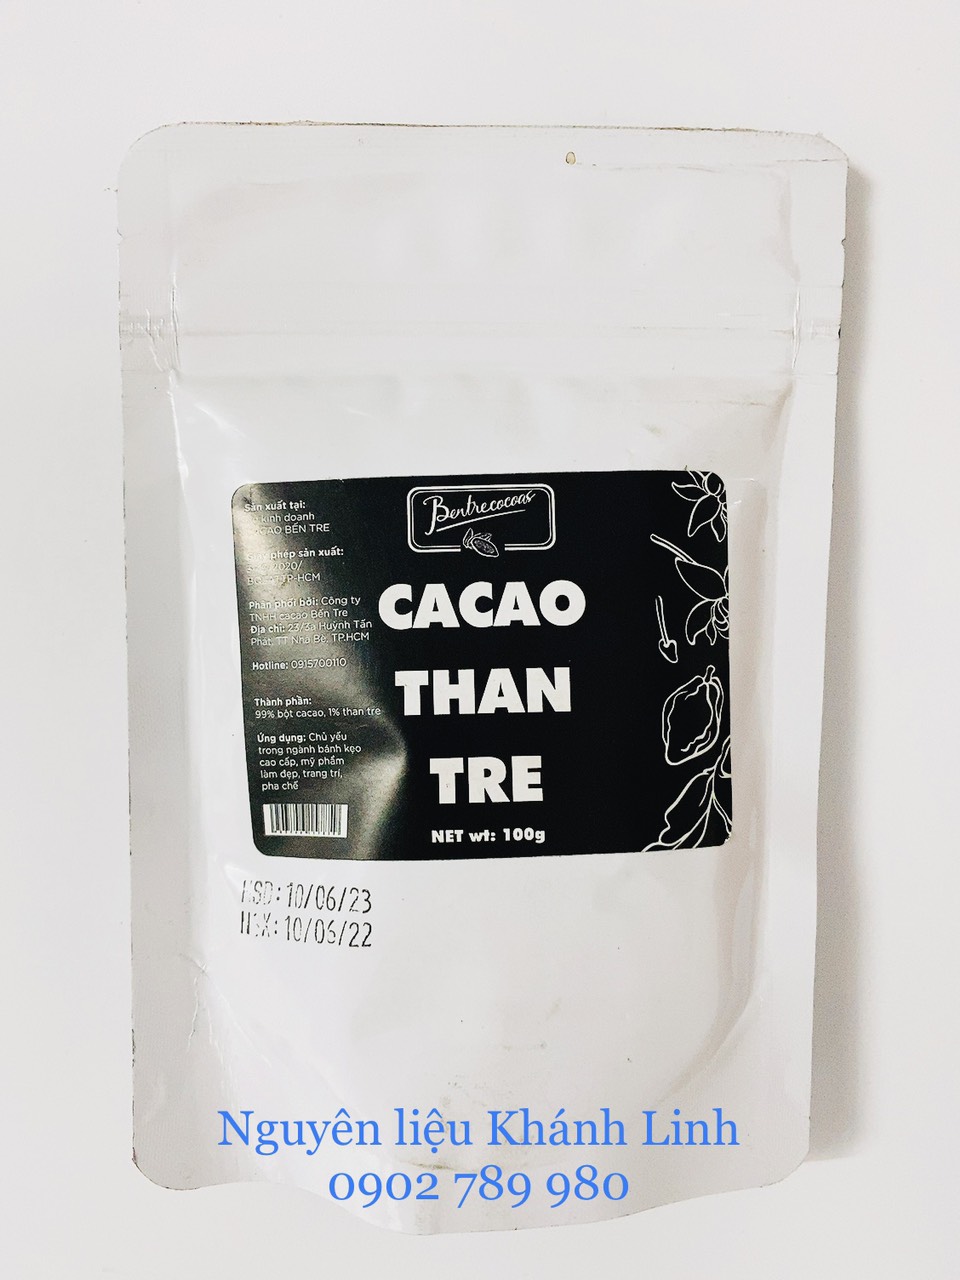  Bột Cacao Than Tre 100g